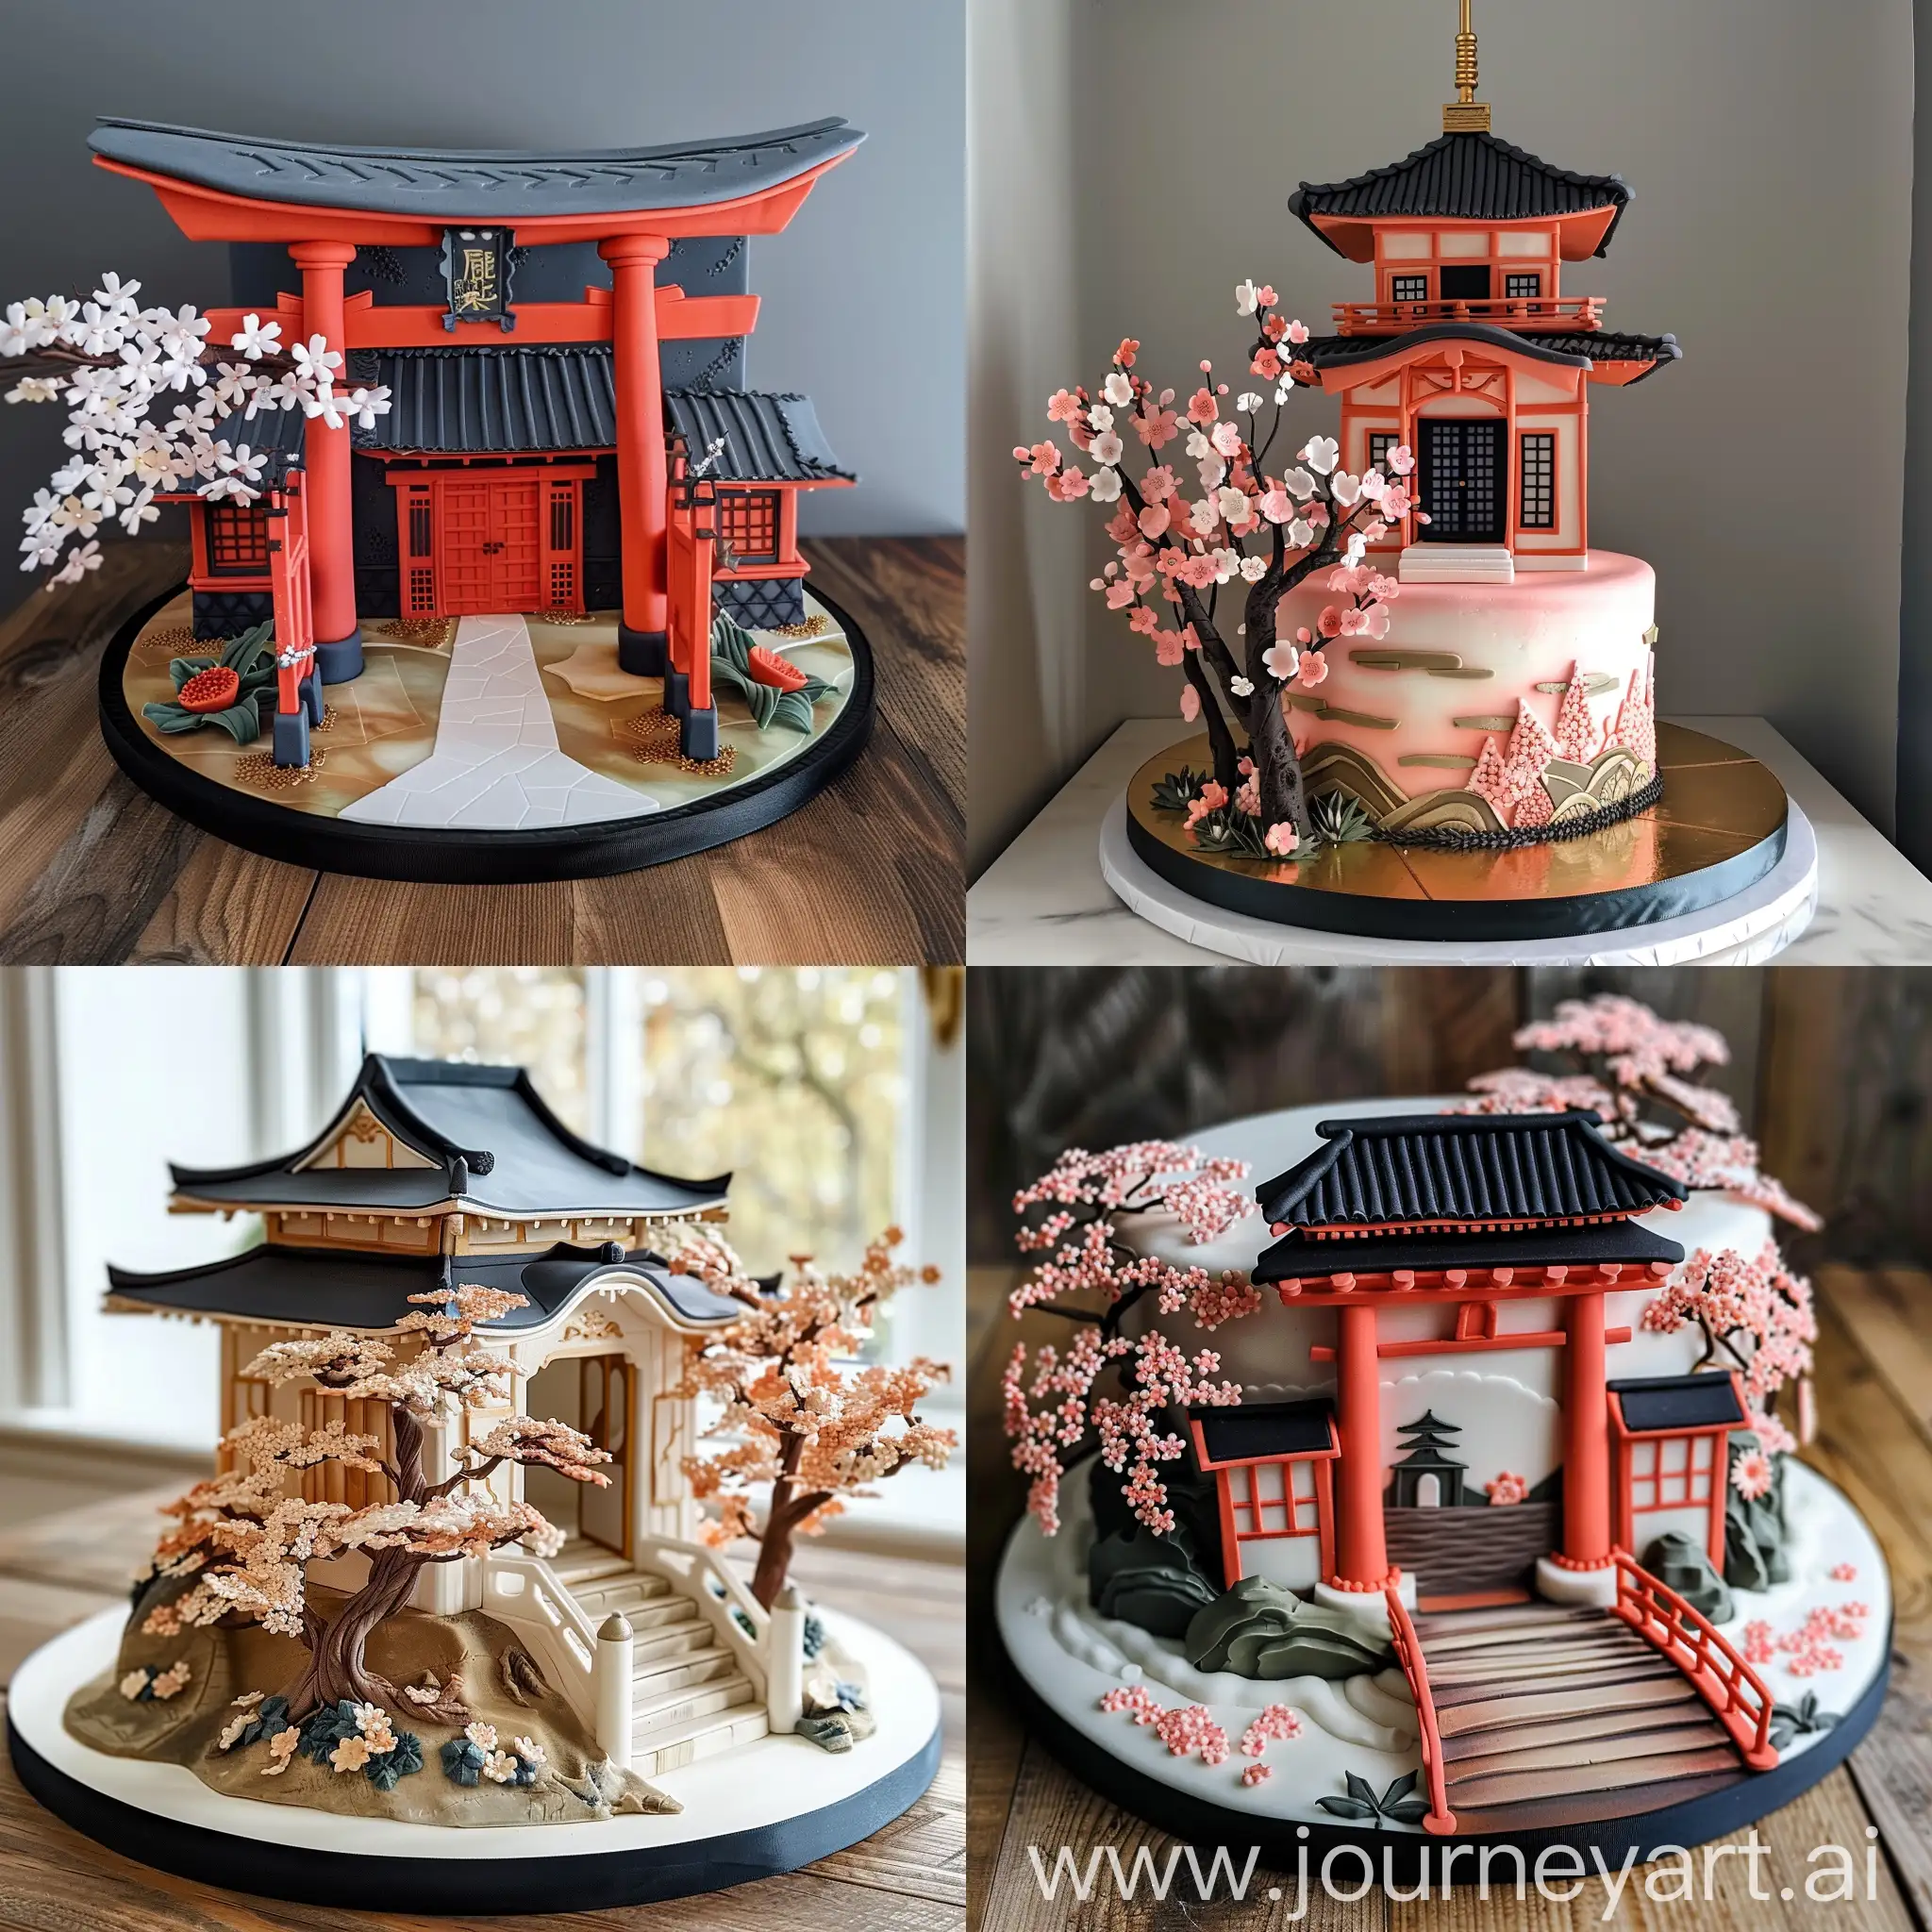 A cake with a japanese and architecture theme